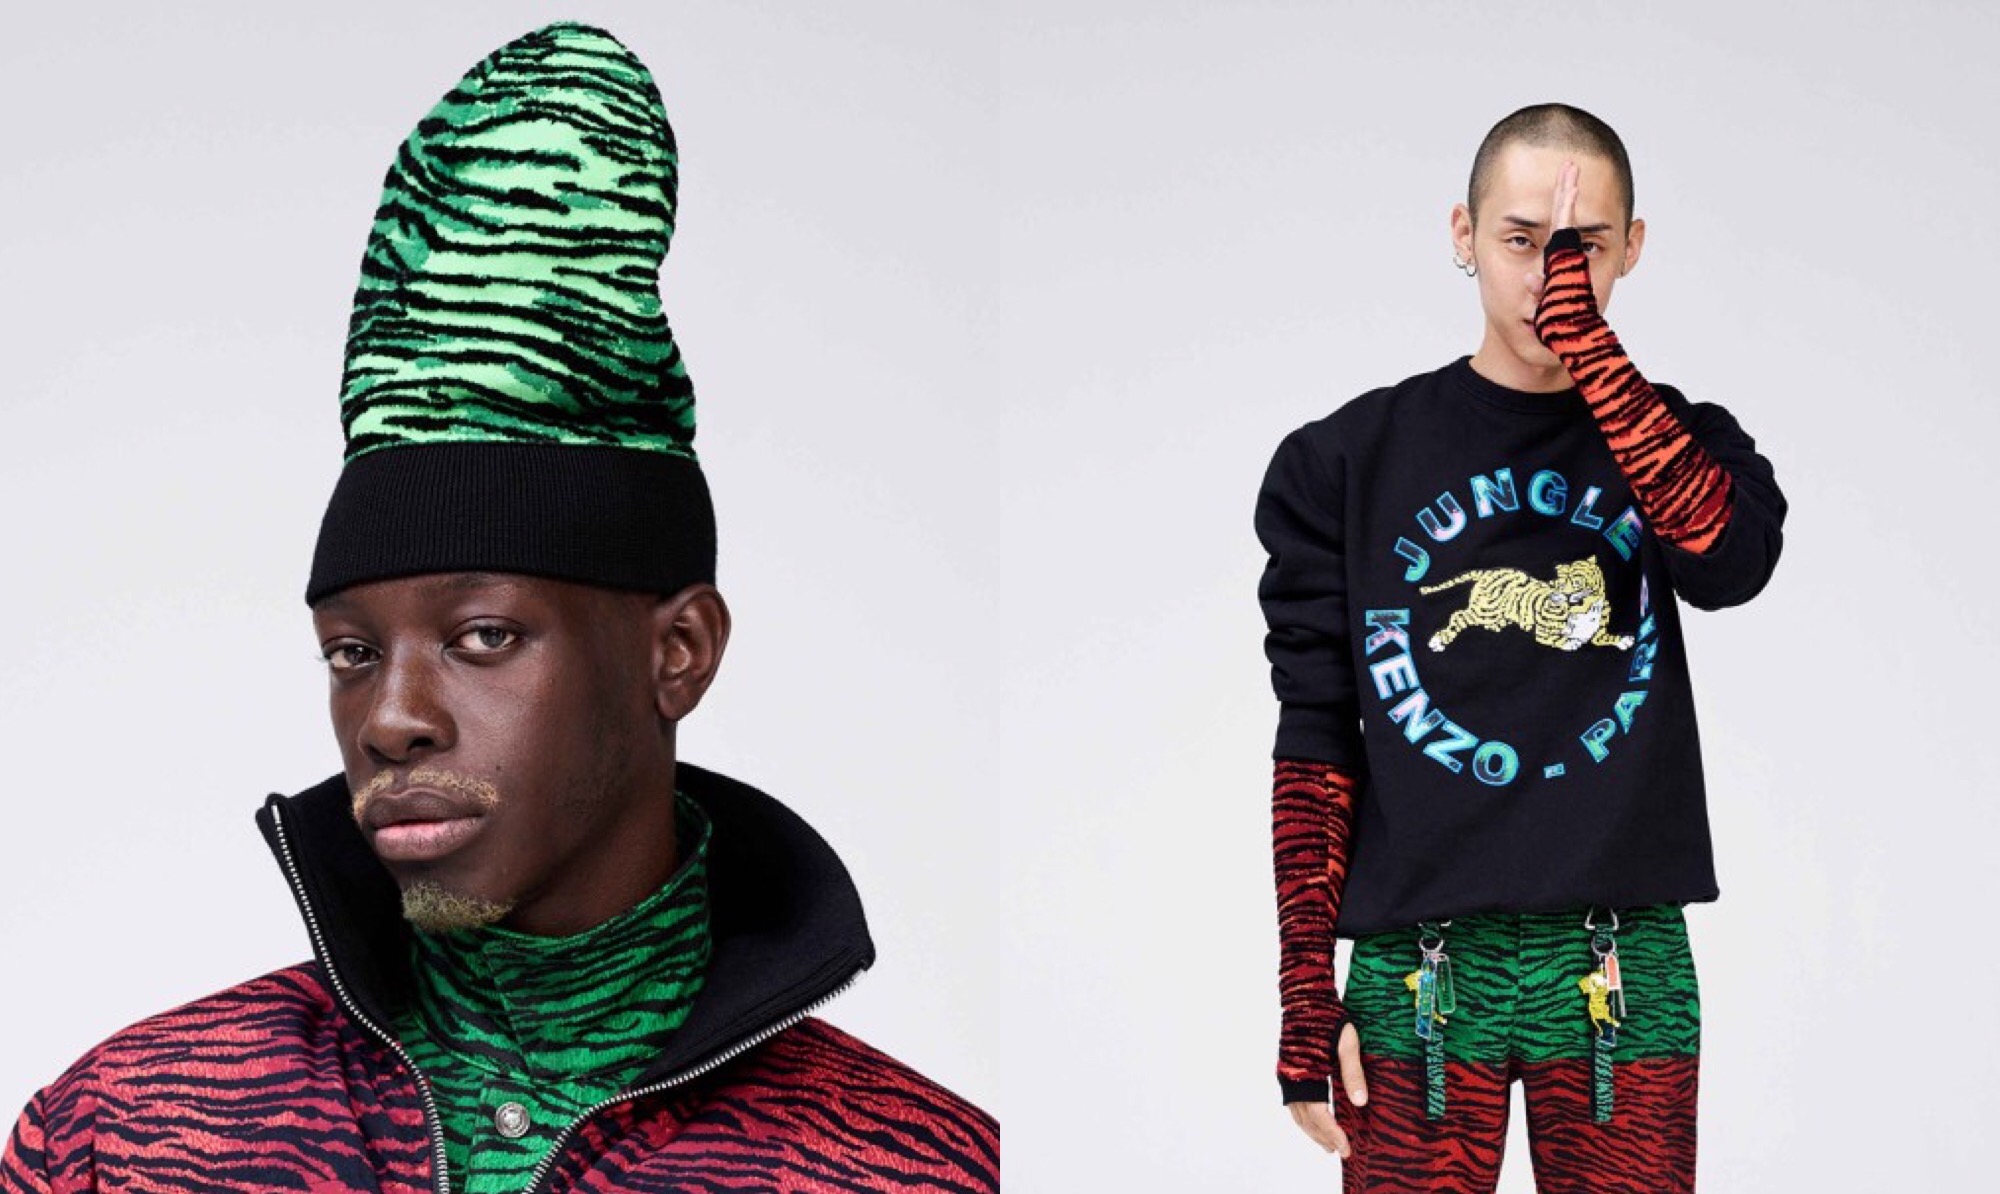 Kenzo x H&M 2016 Fall/Winter Men’s Collection